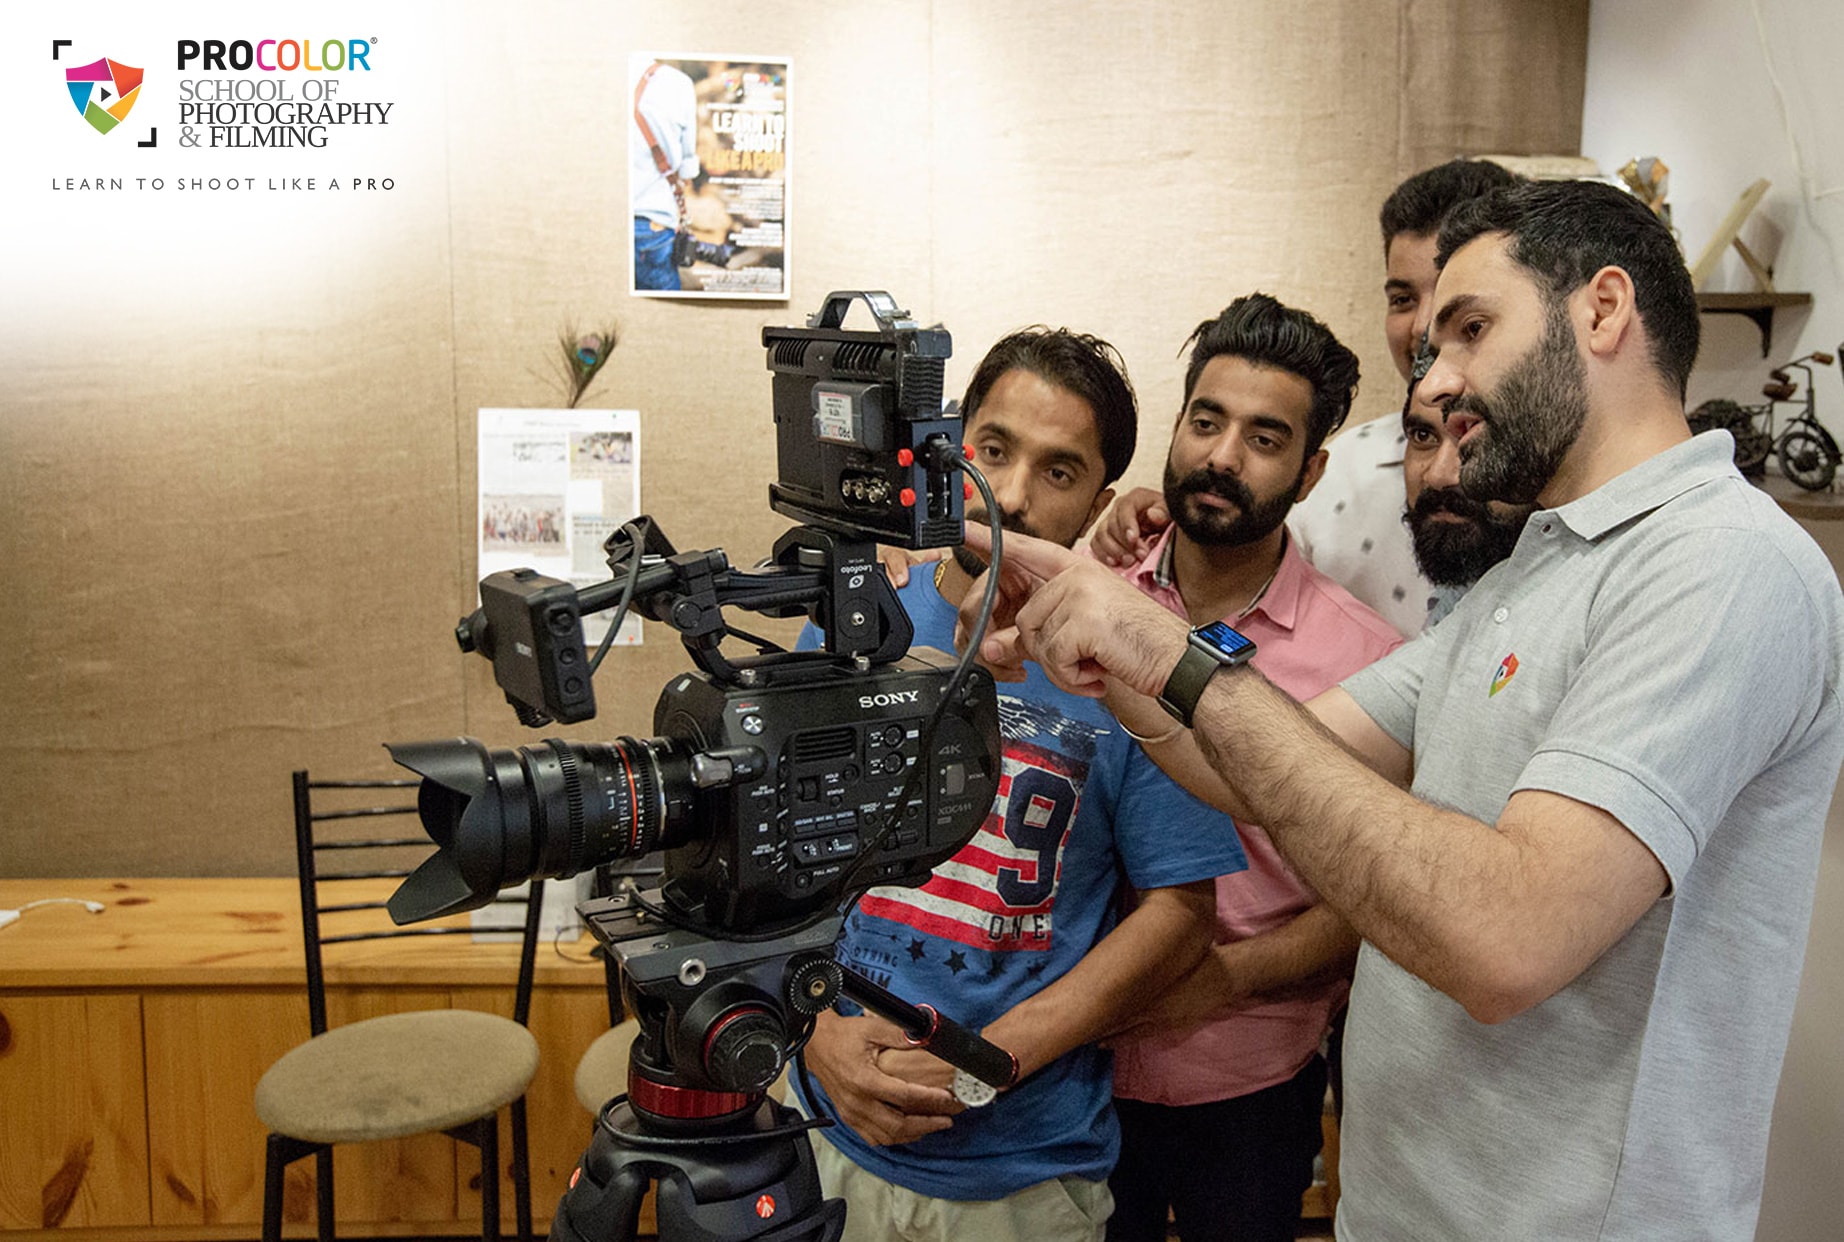 1 YEAR DIPLOMA IN PHOTOGRAPHY & FILMMAKING